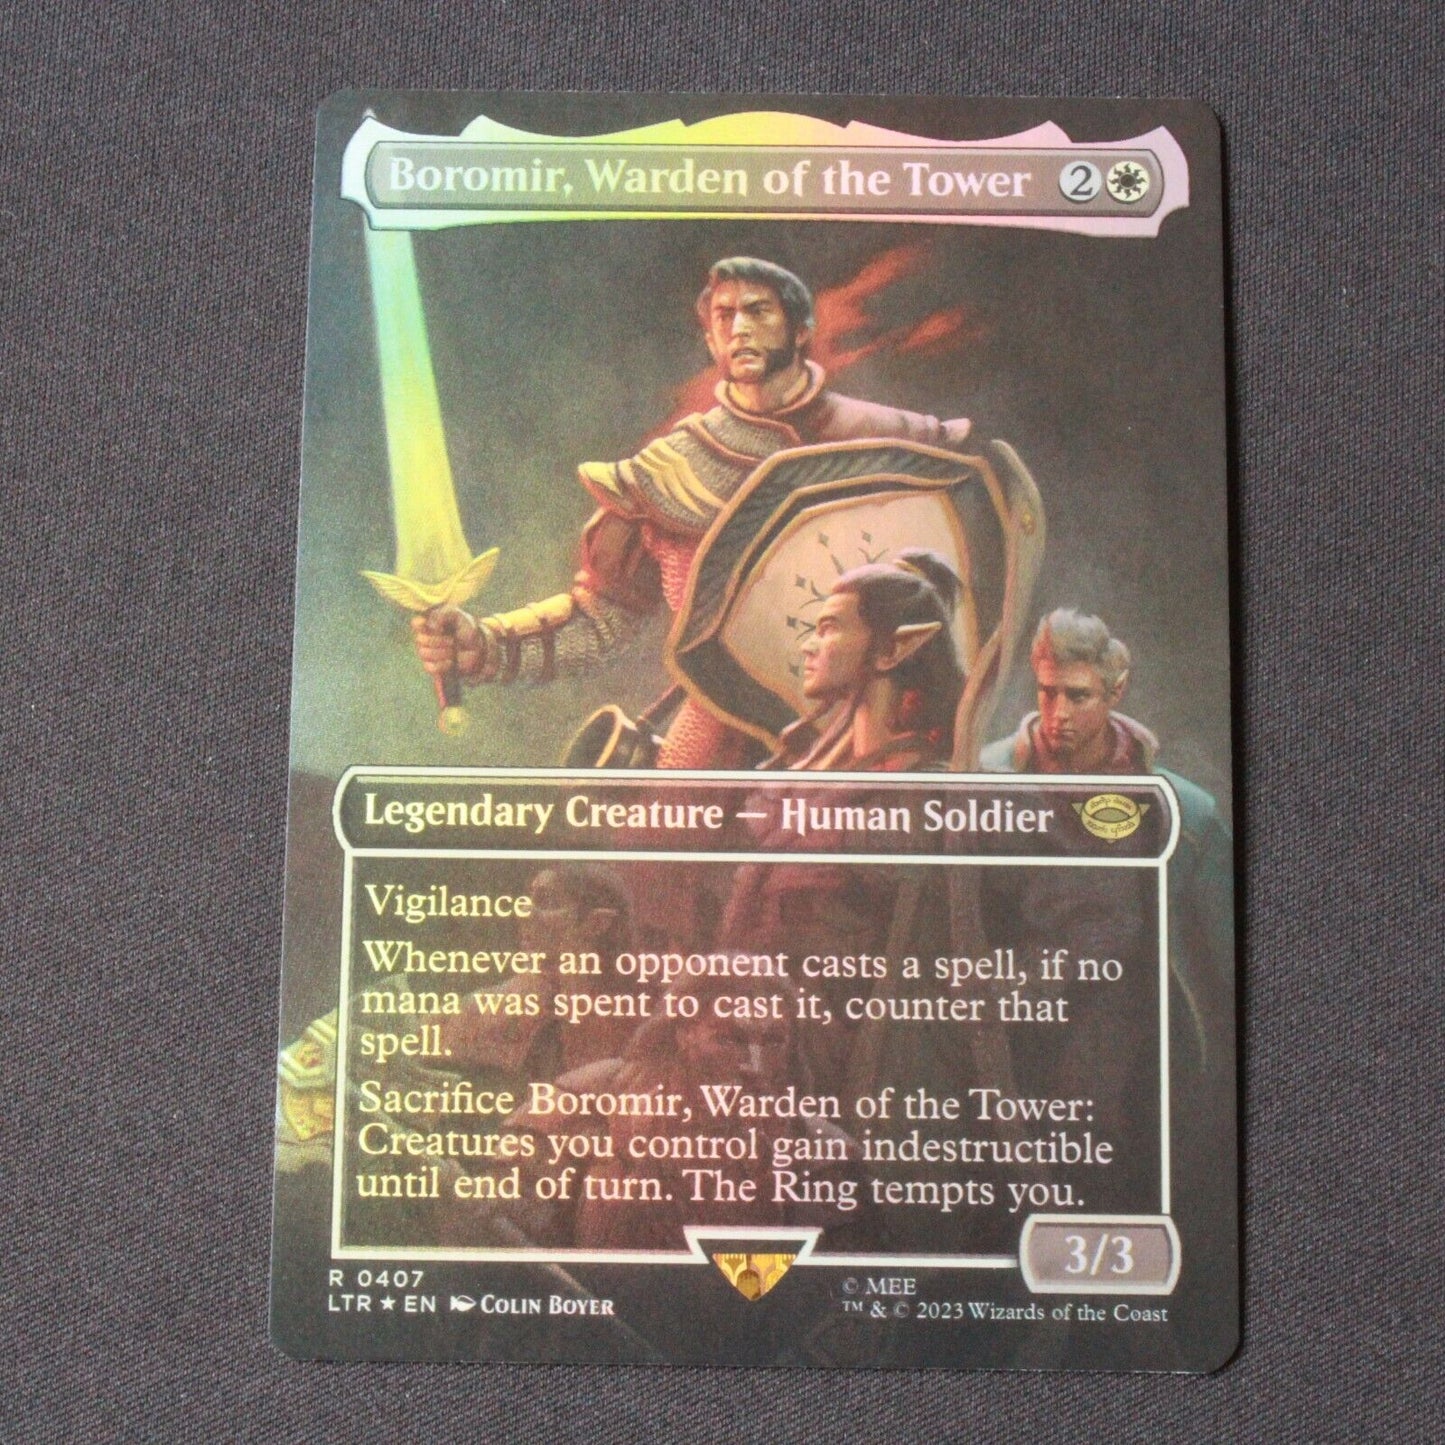 MTG The Lord of the Rings (LTR) Rare FOIL Boromir, Warden of the Tower 407 NM